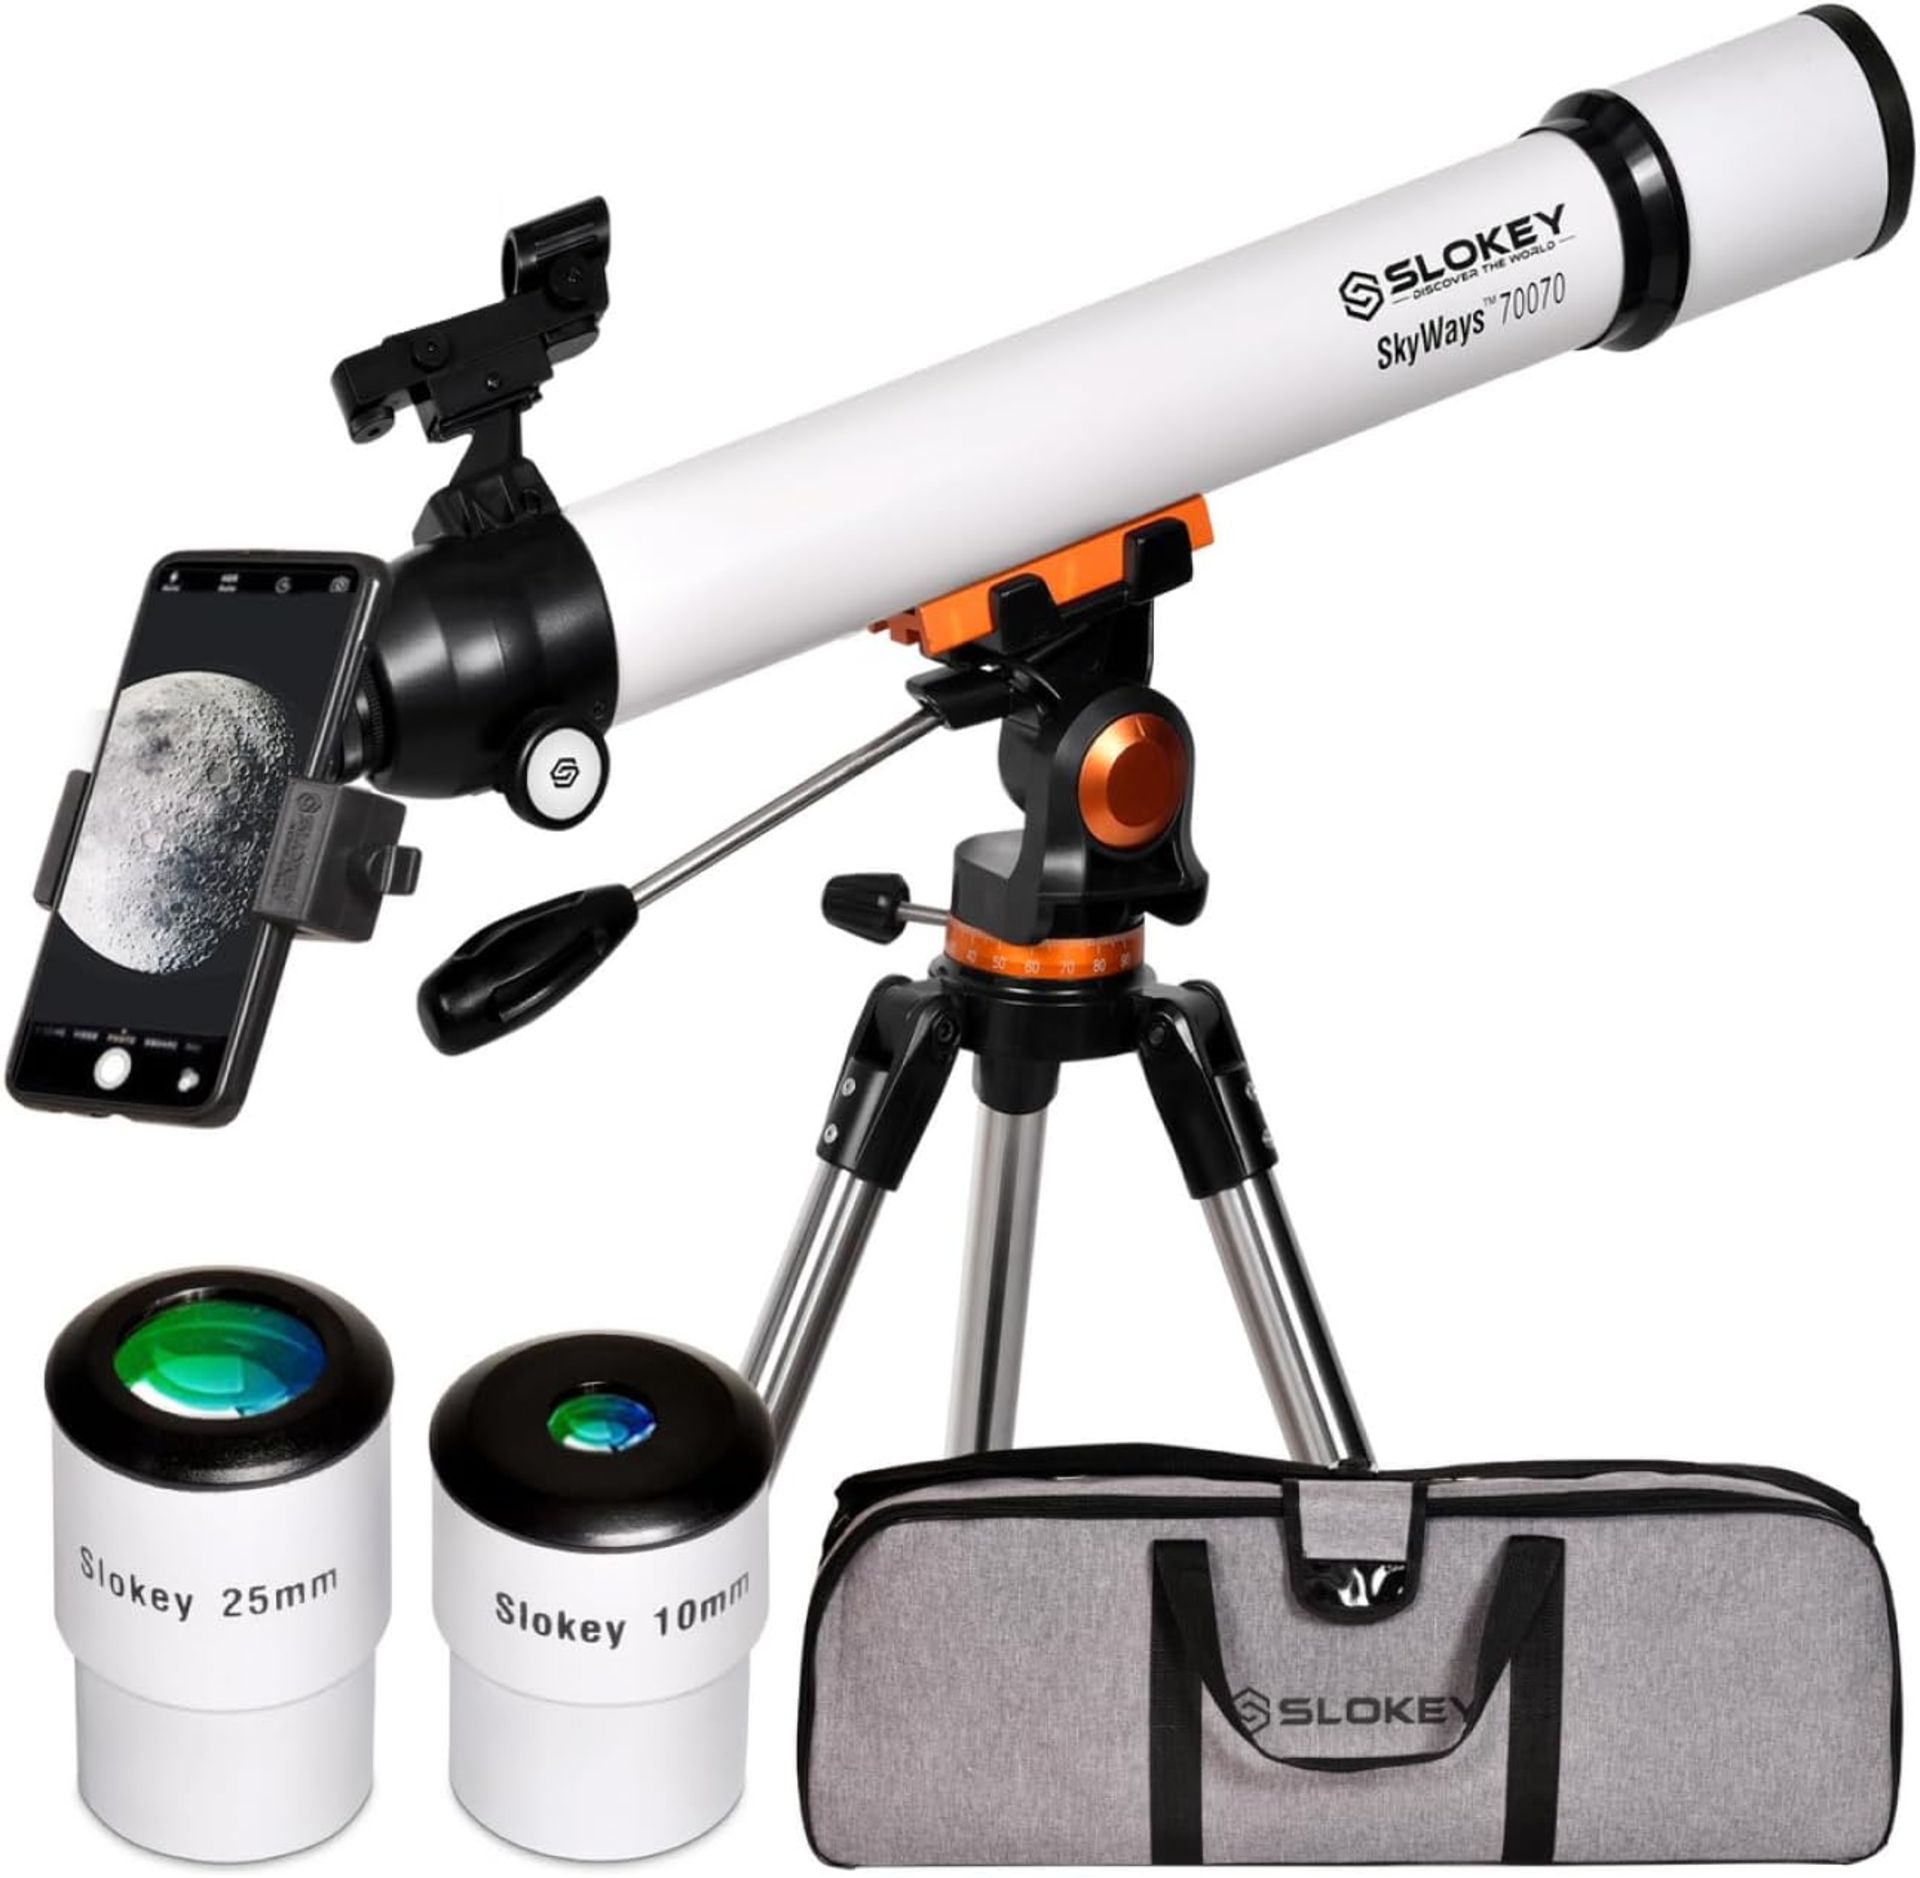 3 x Slokey 70070 SKYWAYS TELESCOPE FOR ASTRONOMY WITH ACCESSORIES (NEW) - AMAZON RRP Â£479.97 ! - Image 2 of 10